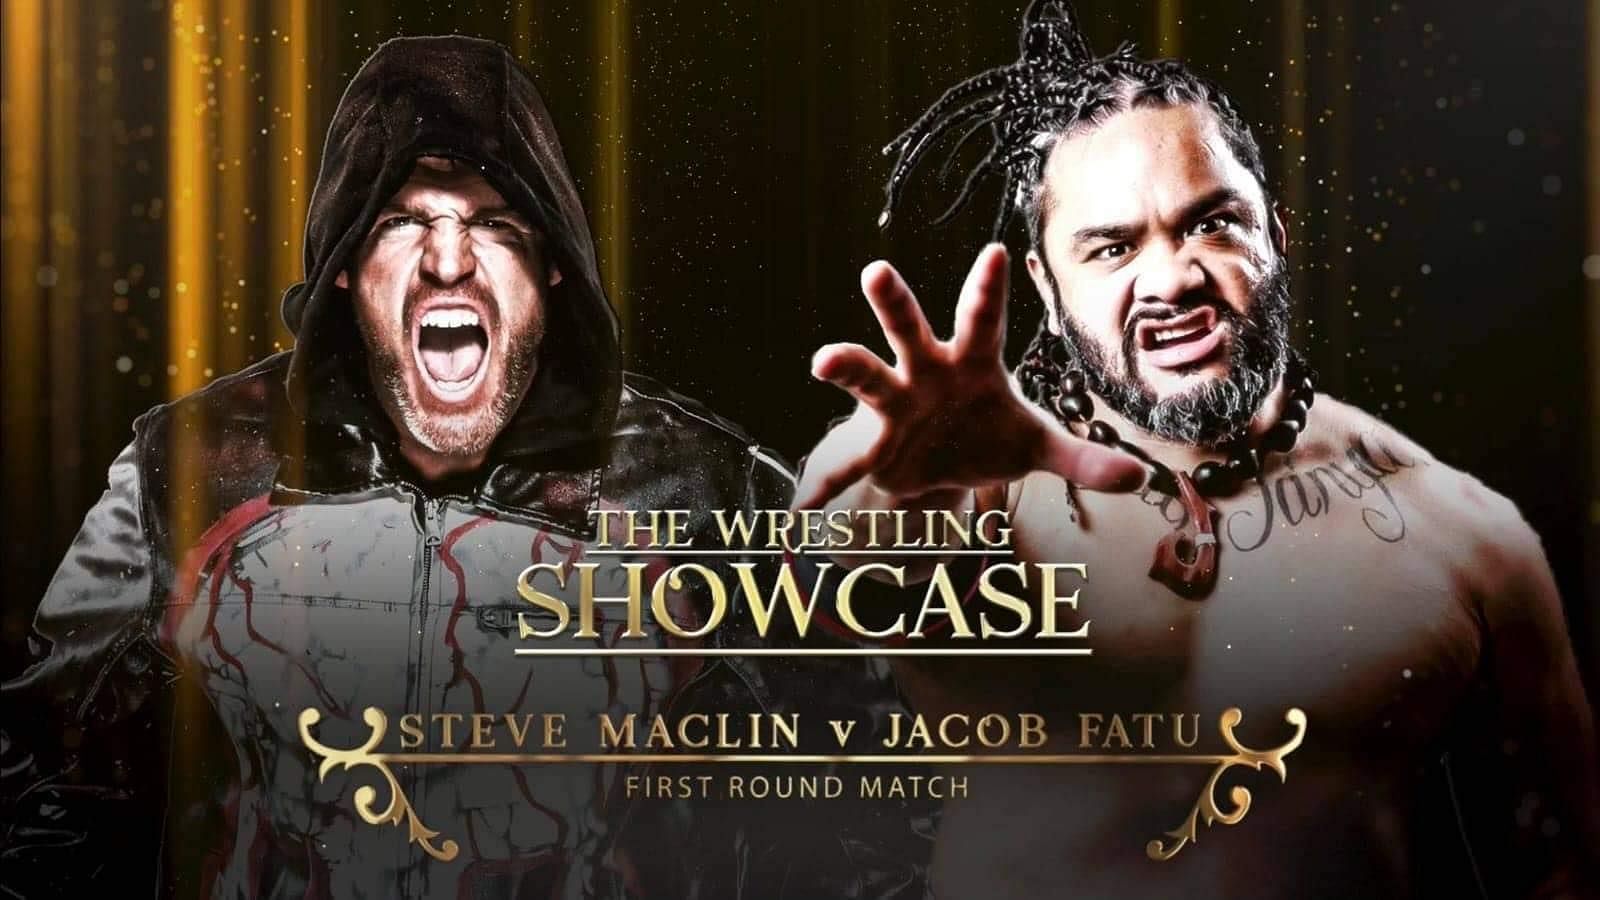 Another match has been announced for The Wrestling Showcase.